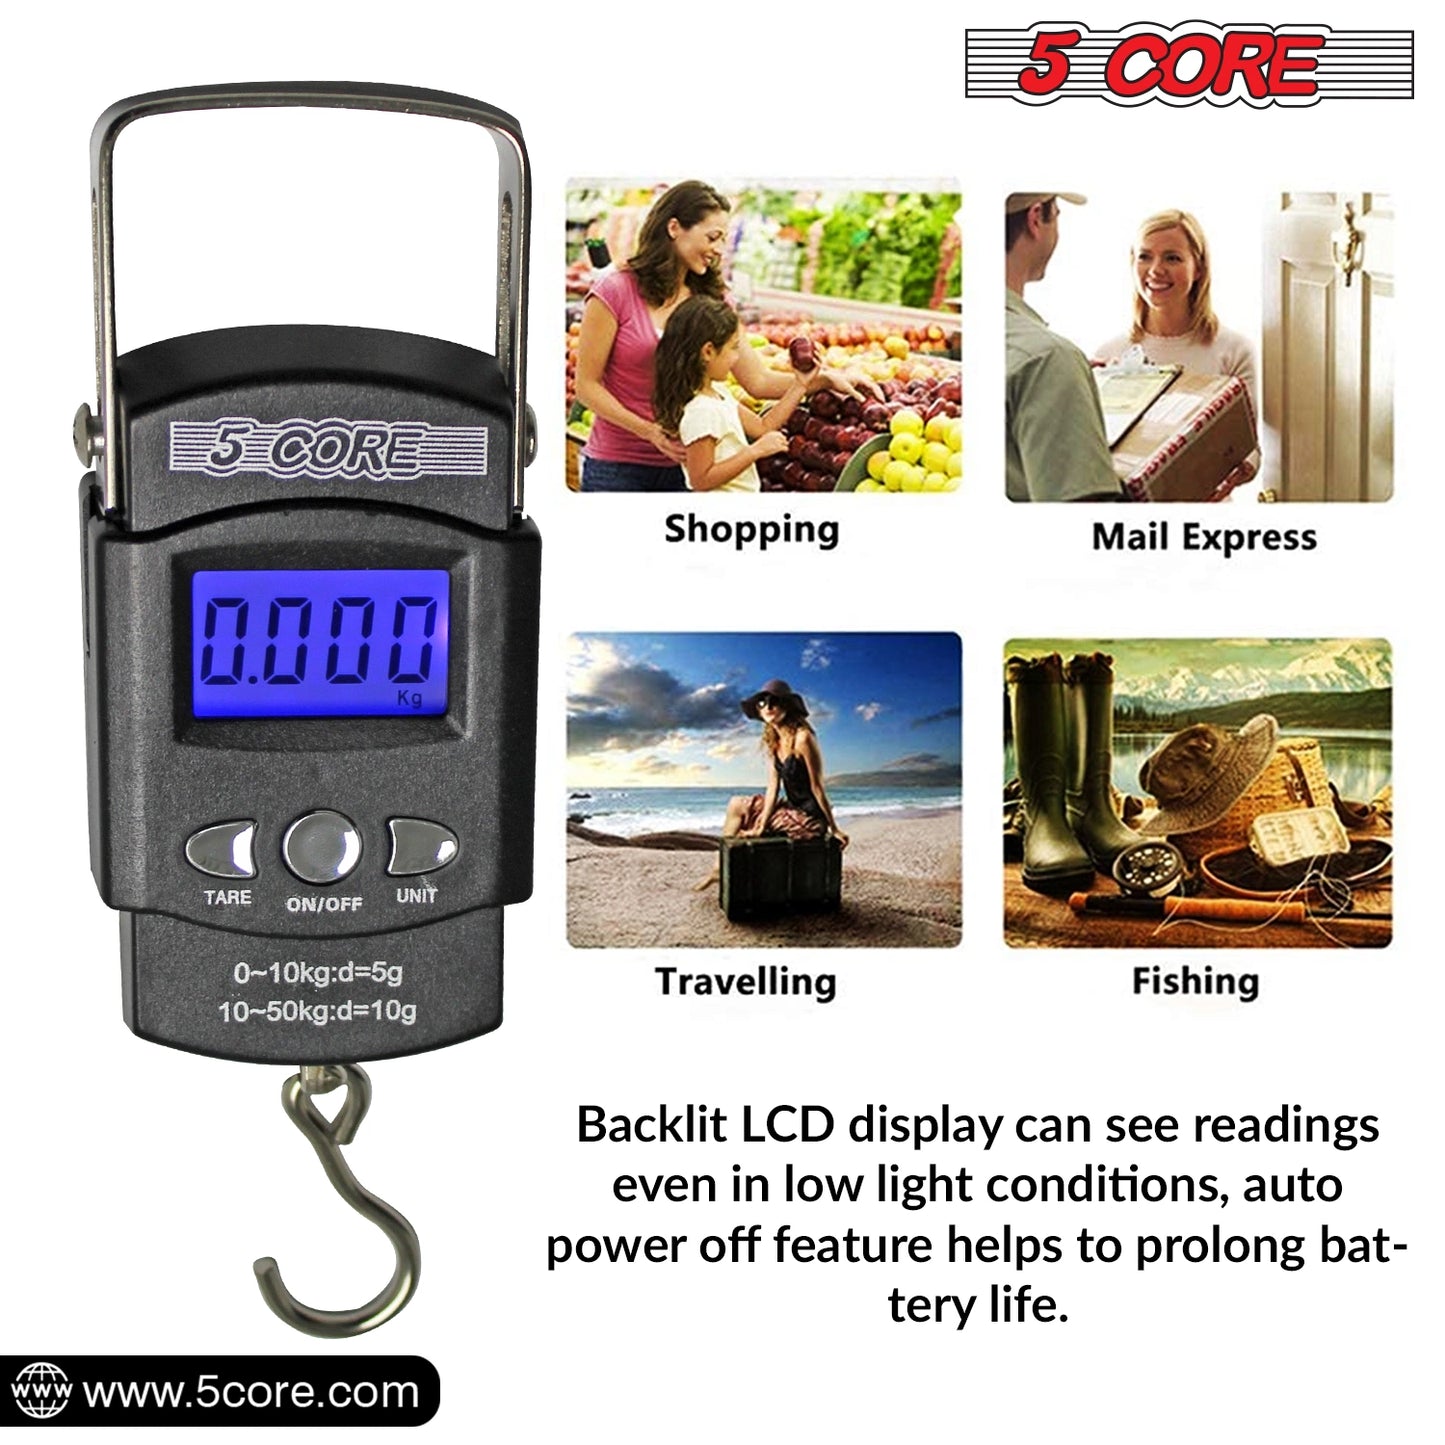 5 Core Digital Luggage & Fishing Scale: Your Best Travel Companion